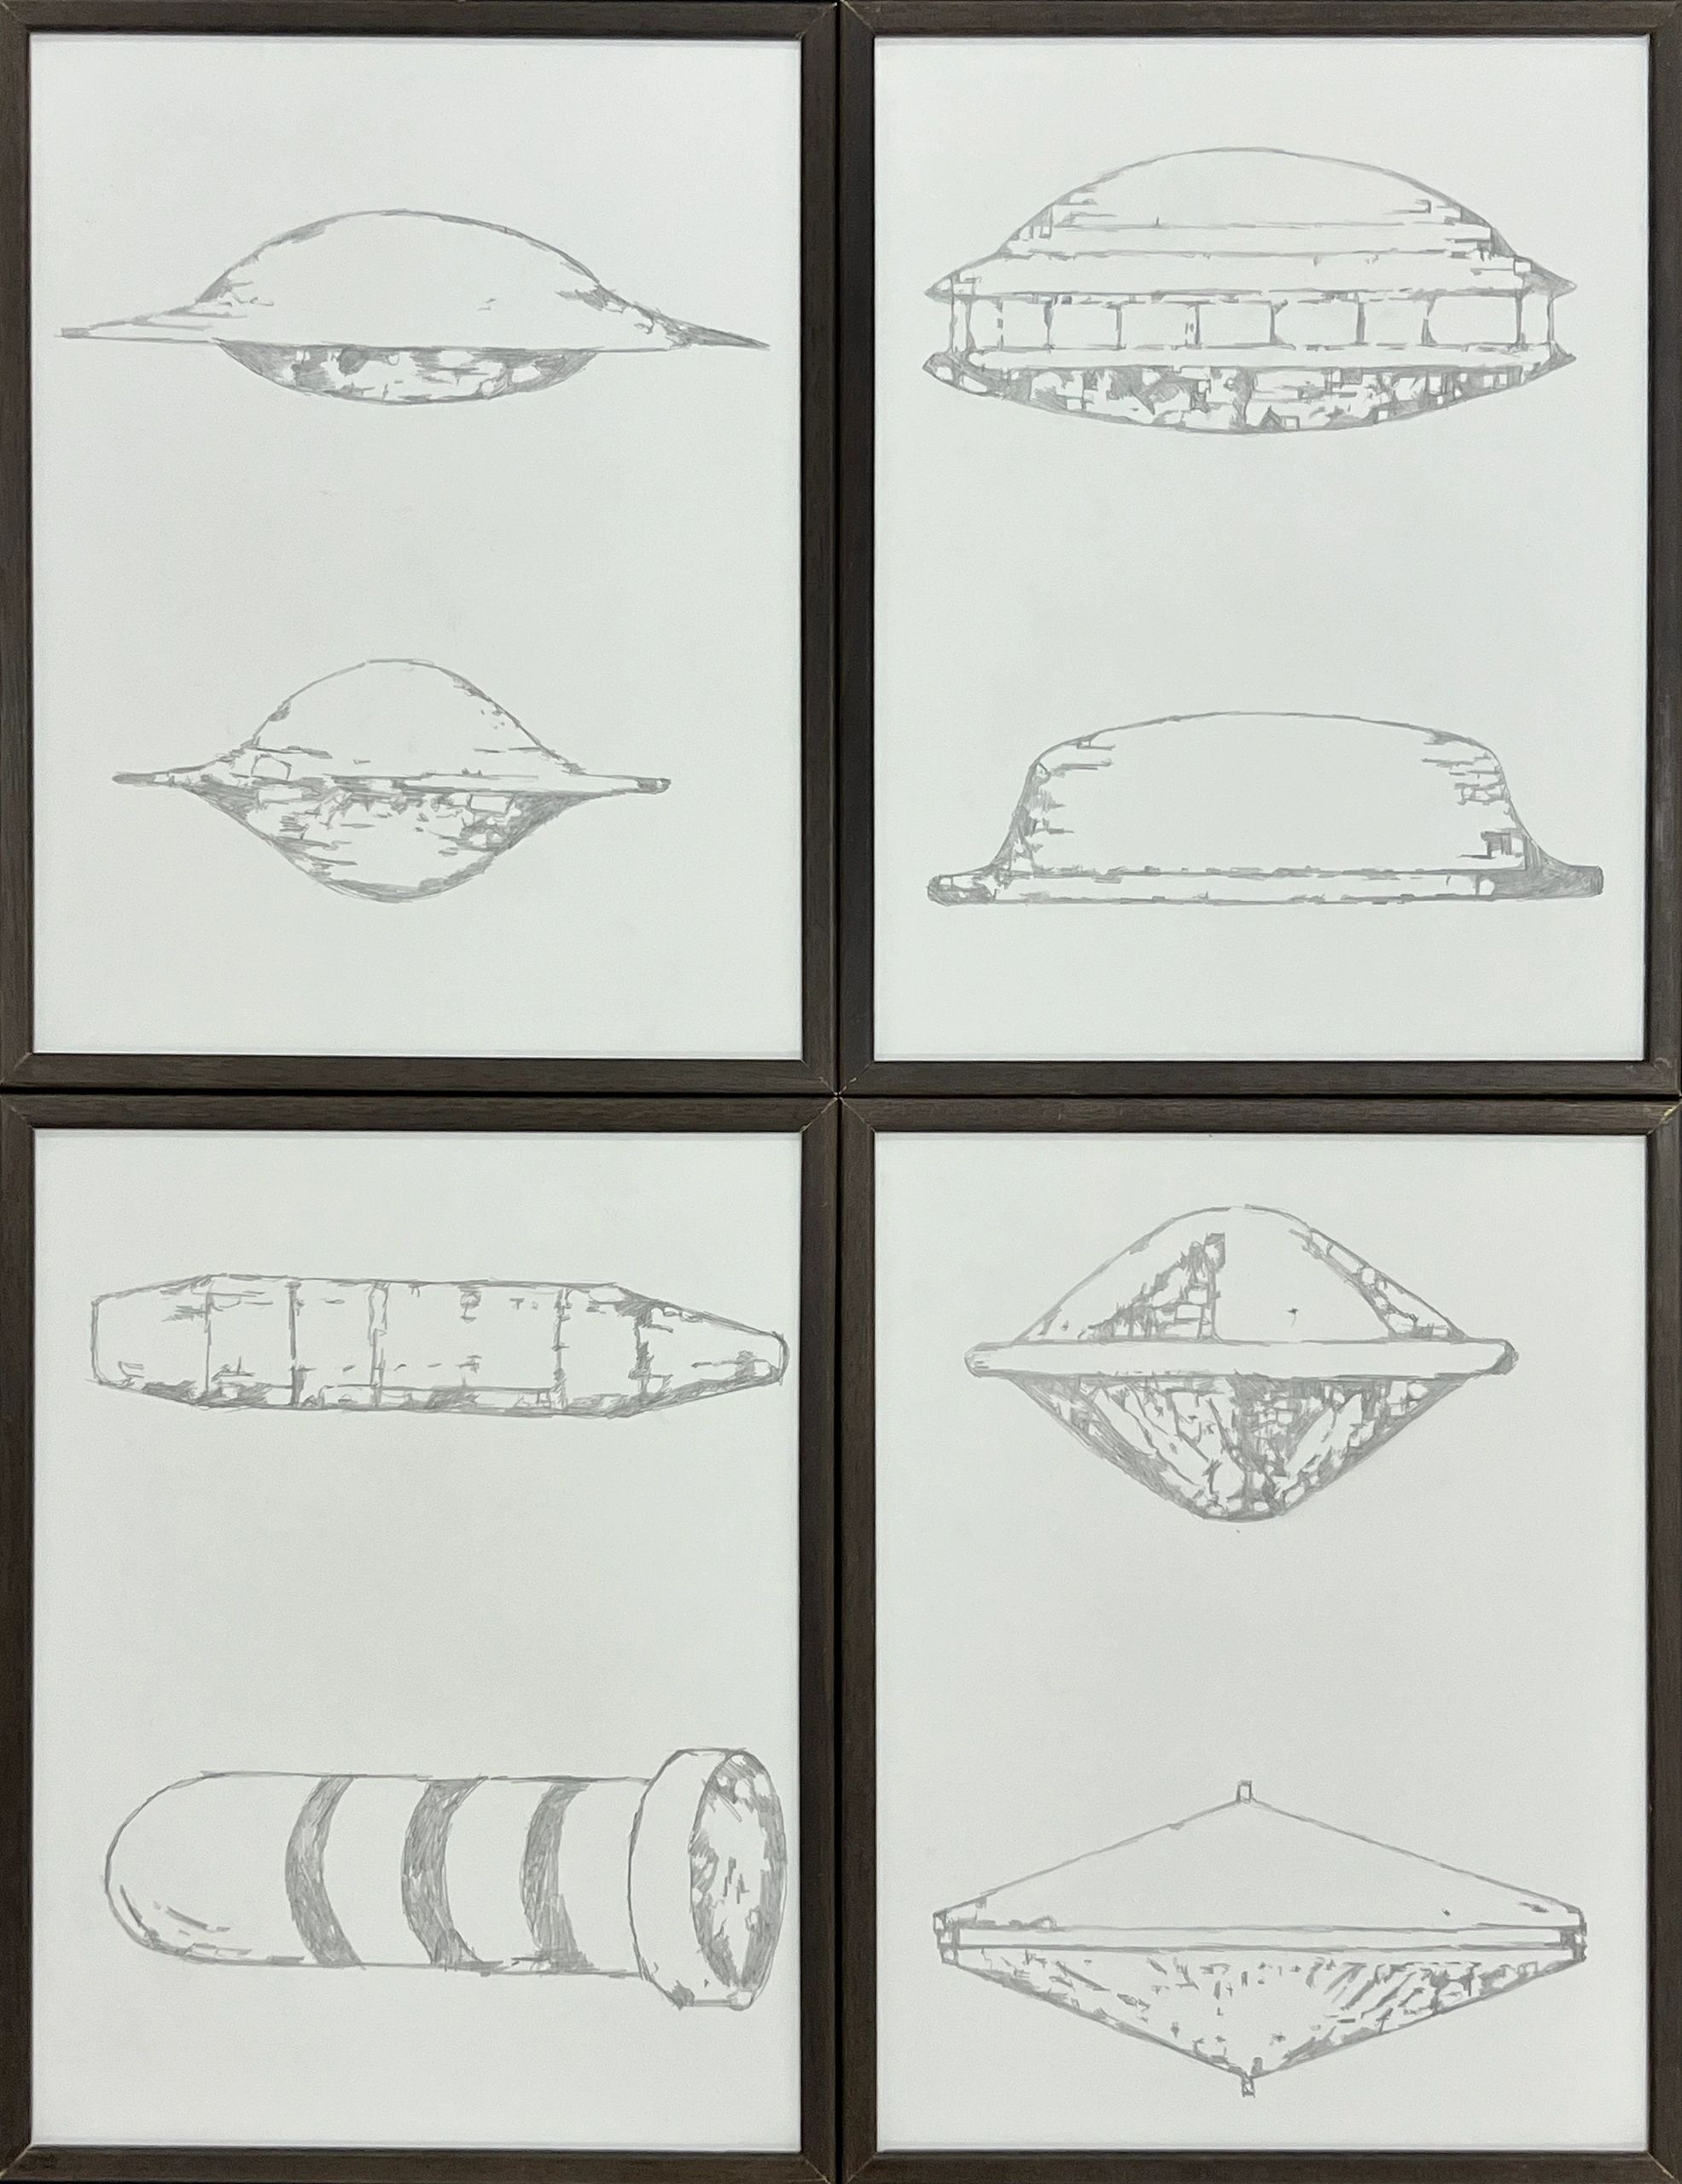 A group of 8 unidentified flying objects drawn in pencil based on historic documentation of UFOs 195